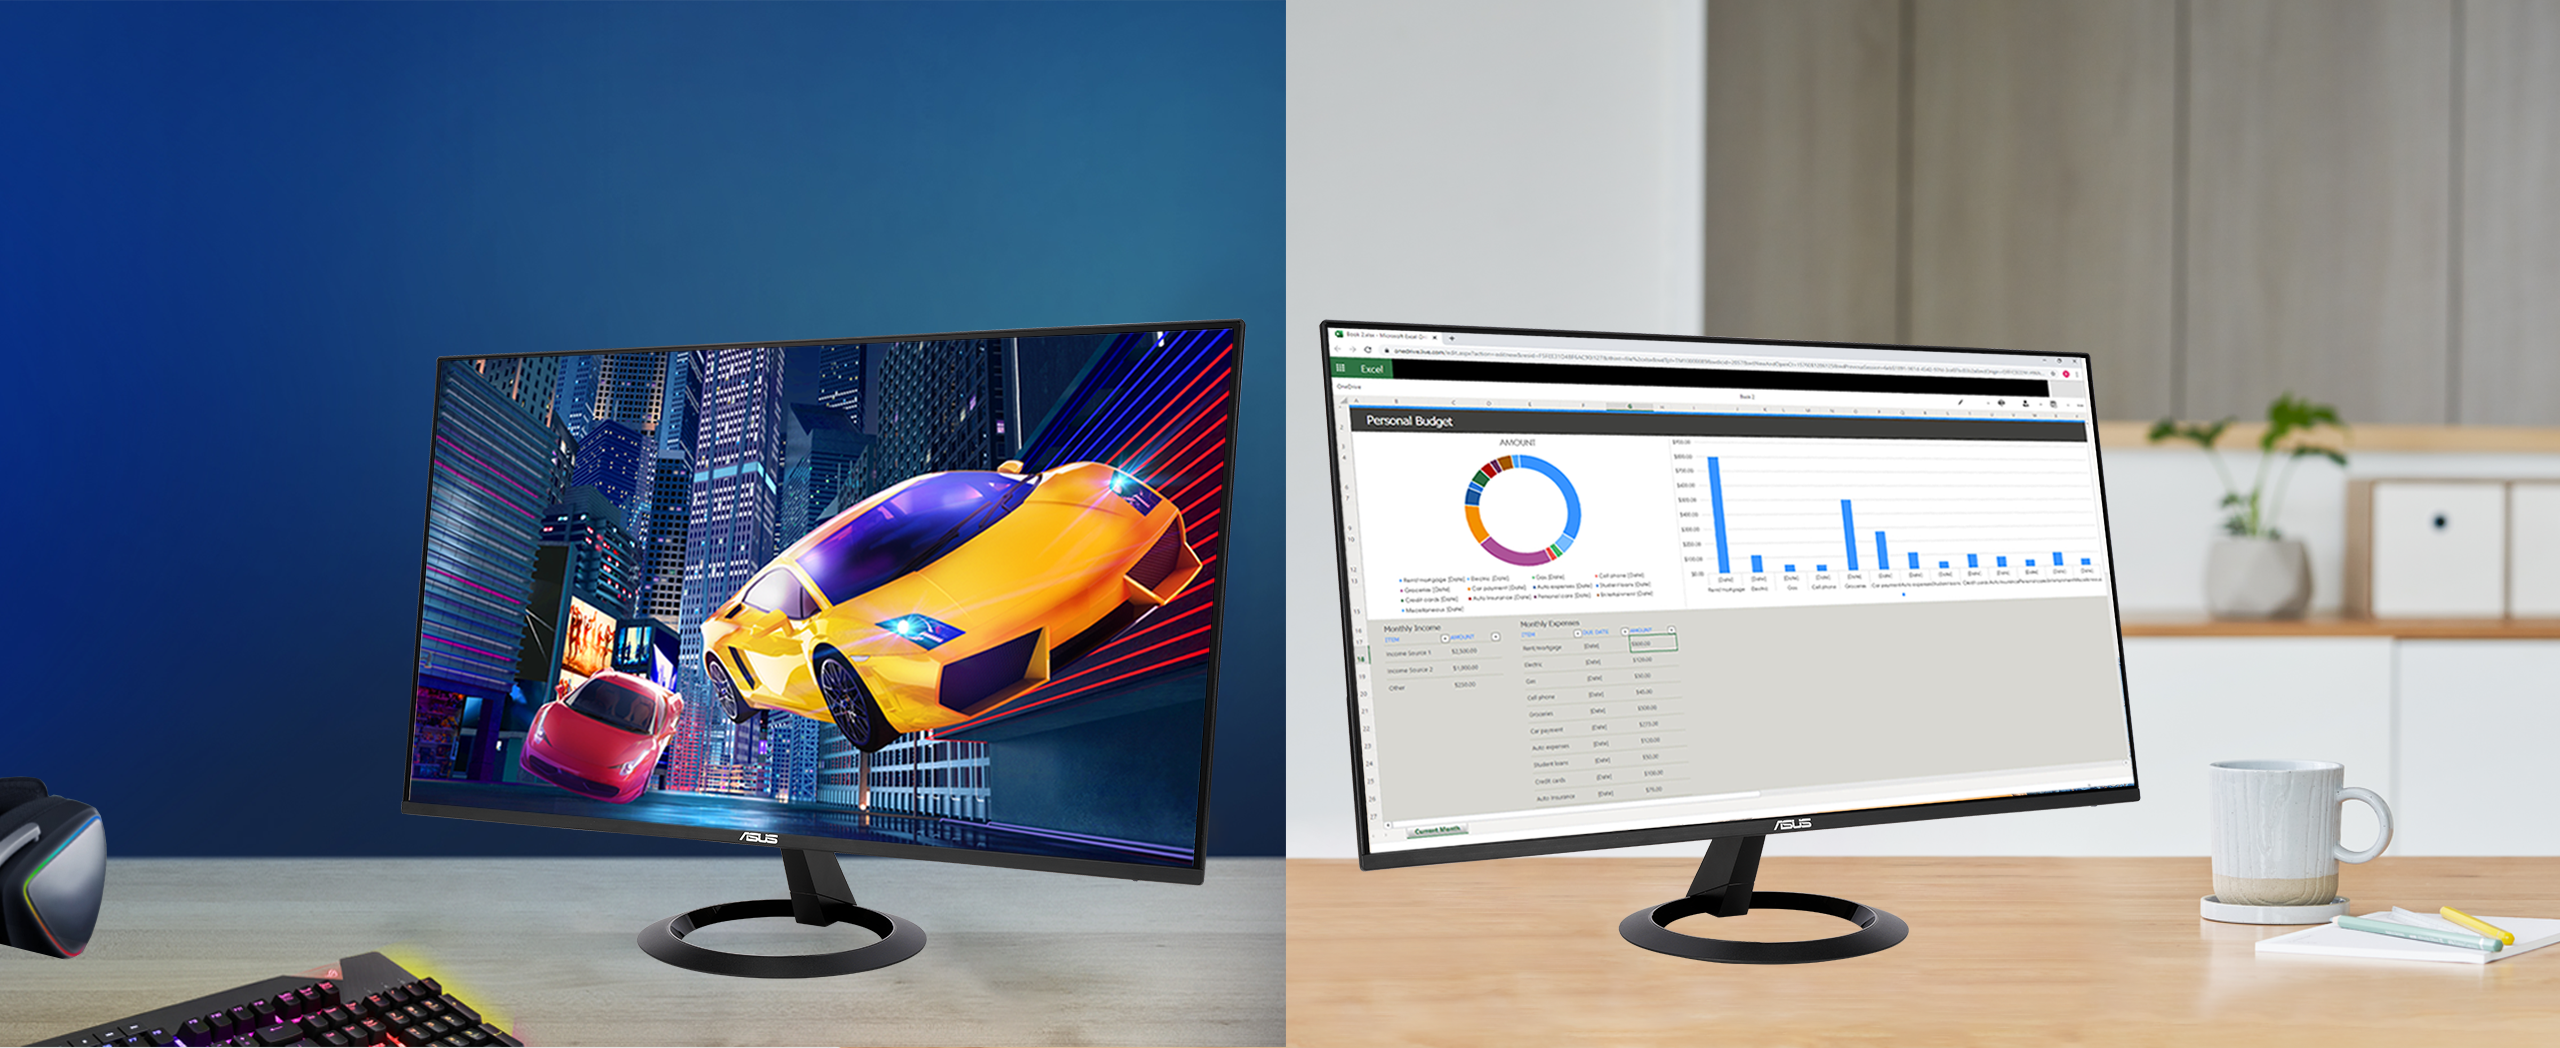 ASUS VZ27EHF is 27-inch IPS Eye Care Gaming monitor with fast 100Hz refresh rate and Adaptive-Sync technology to eliminate screen tearing and choppy frame rates for the smoother-than-ever experience.